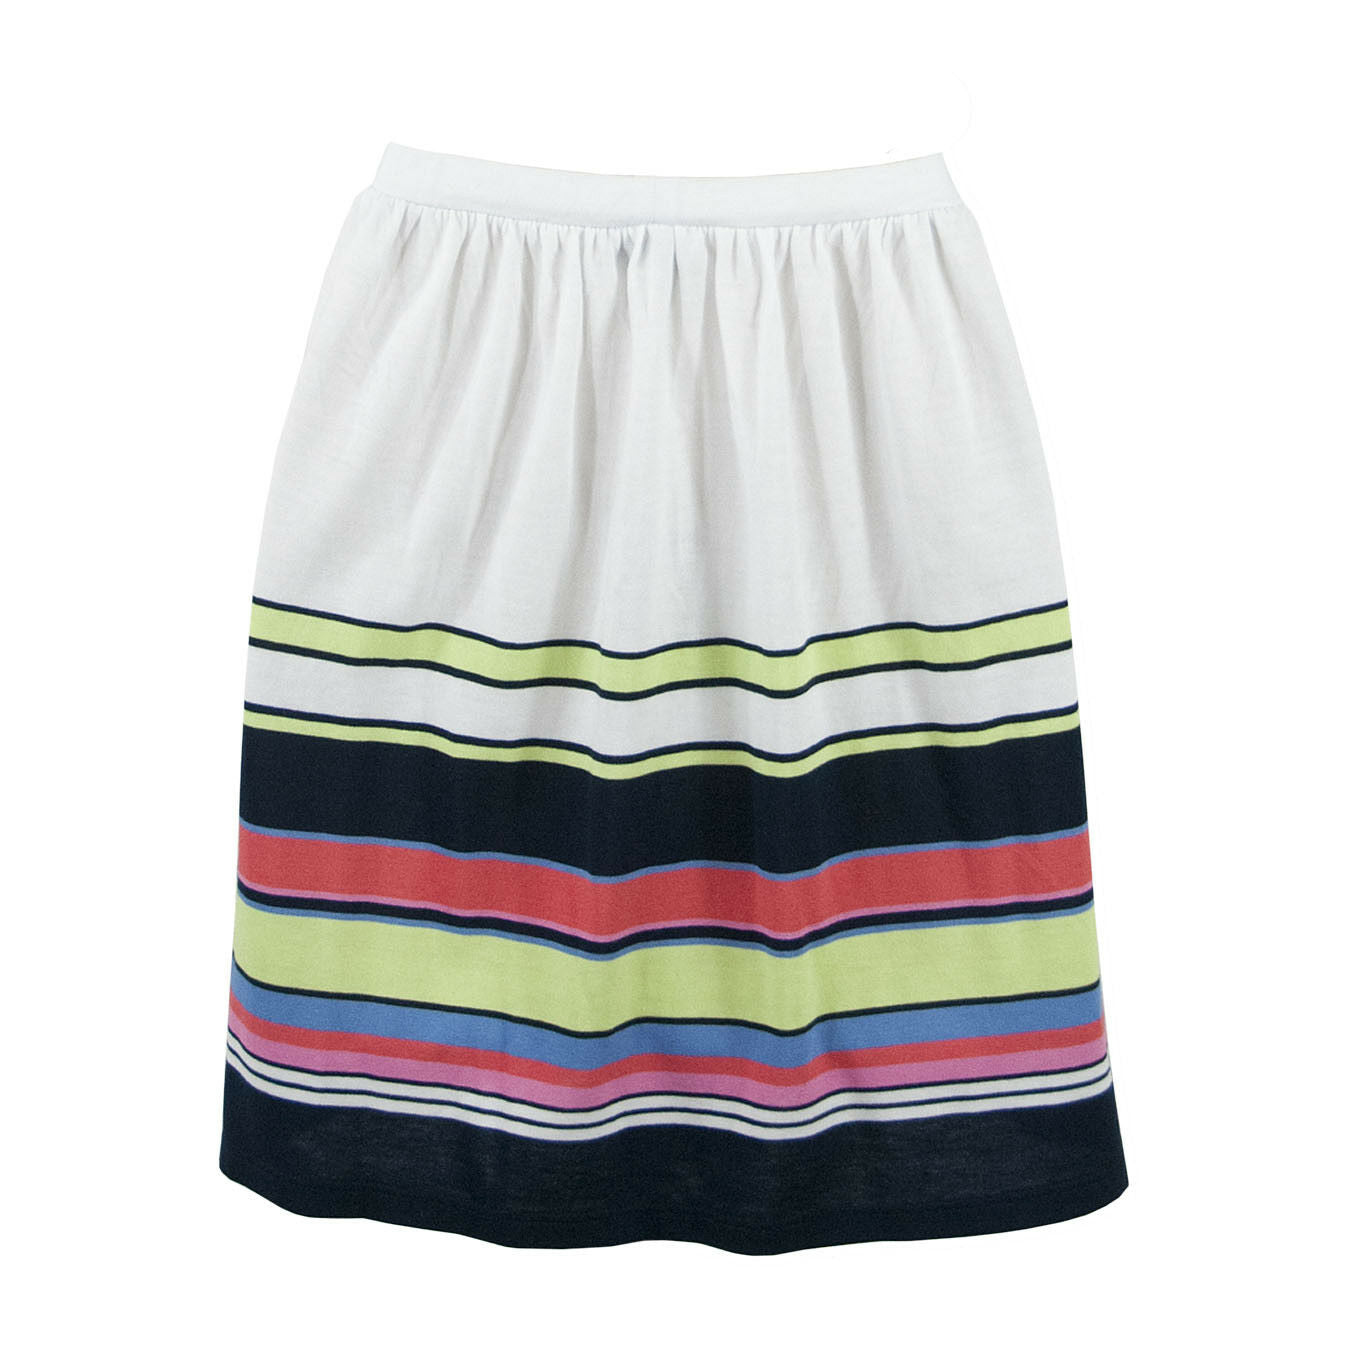 Juicy Couture Navy Lime Multicolor Stripe A Line Knit Black Label Skirt L NWT